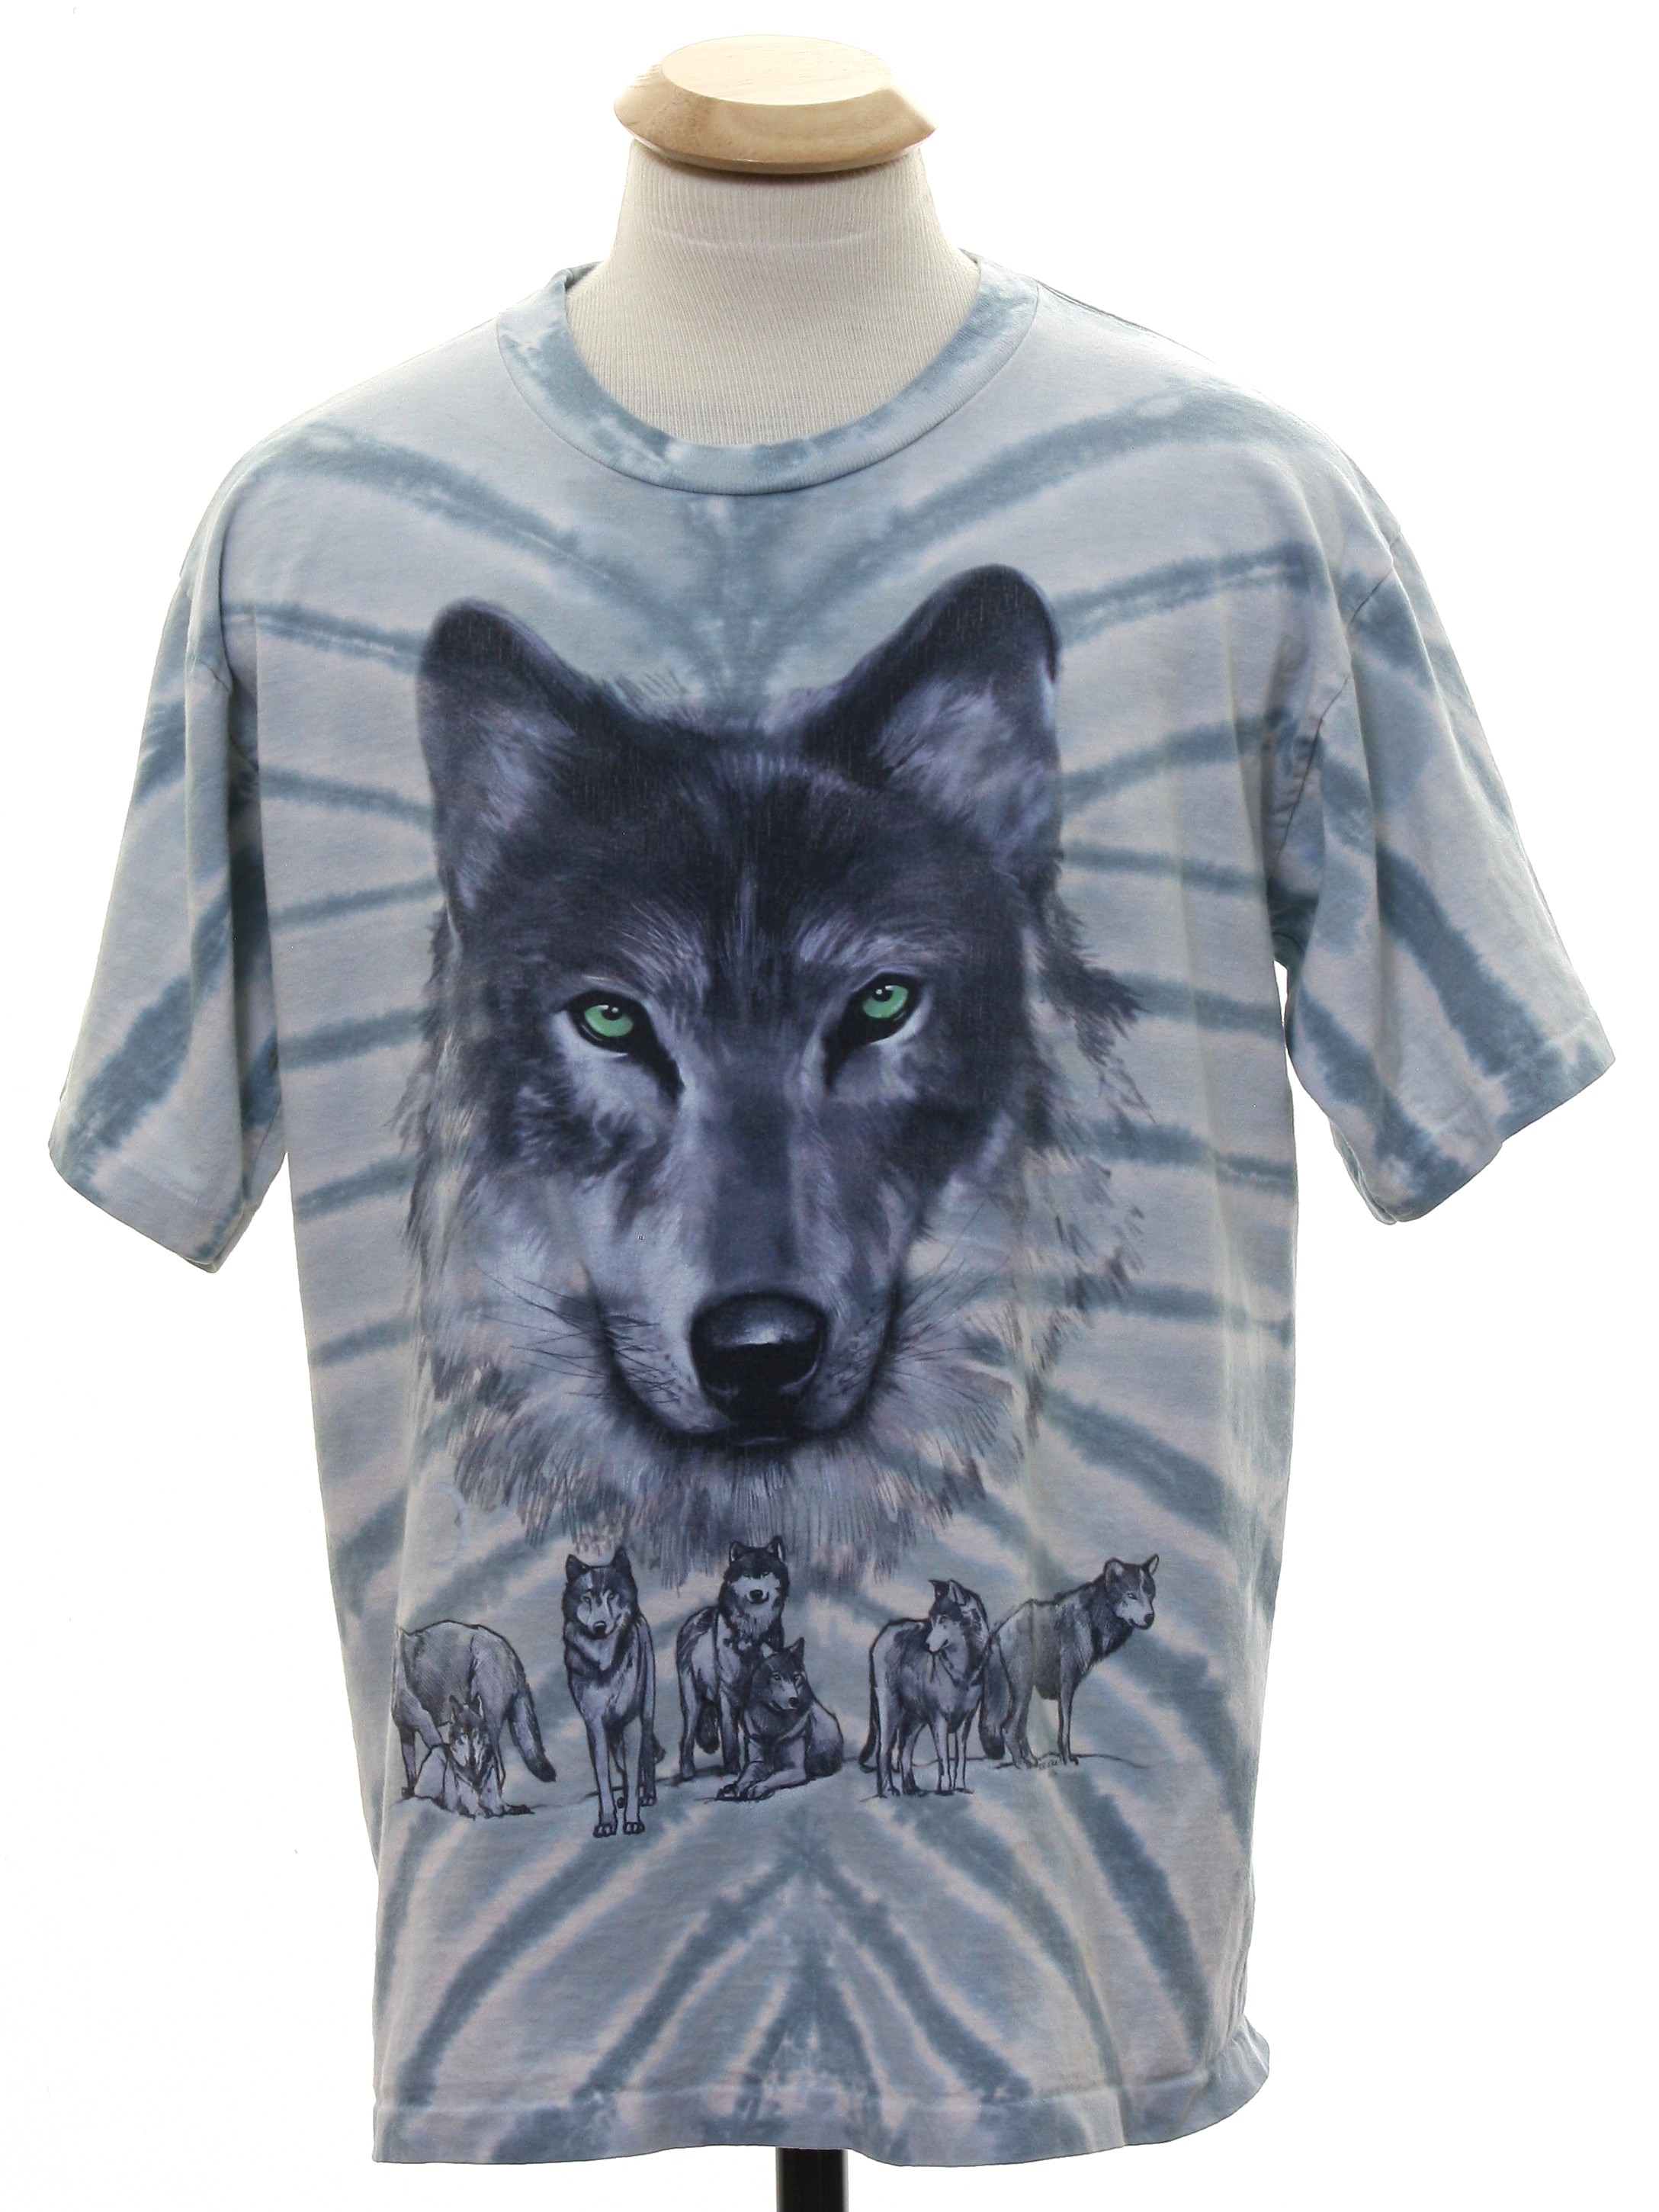 T Shirt 90s Liquid Blue Unisex Light Aqua Background Cotton Short Sleeve Pullover Animal T Shirt Wolf Themed Print On The Front On A Tie Dye Patterned Background In Shades Of Grey Blue Charcoal Grey